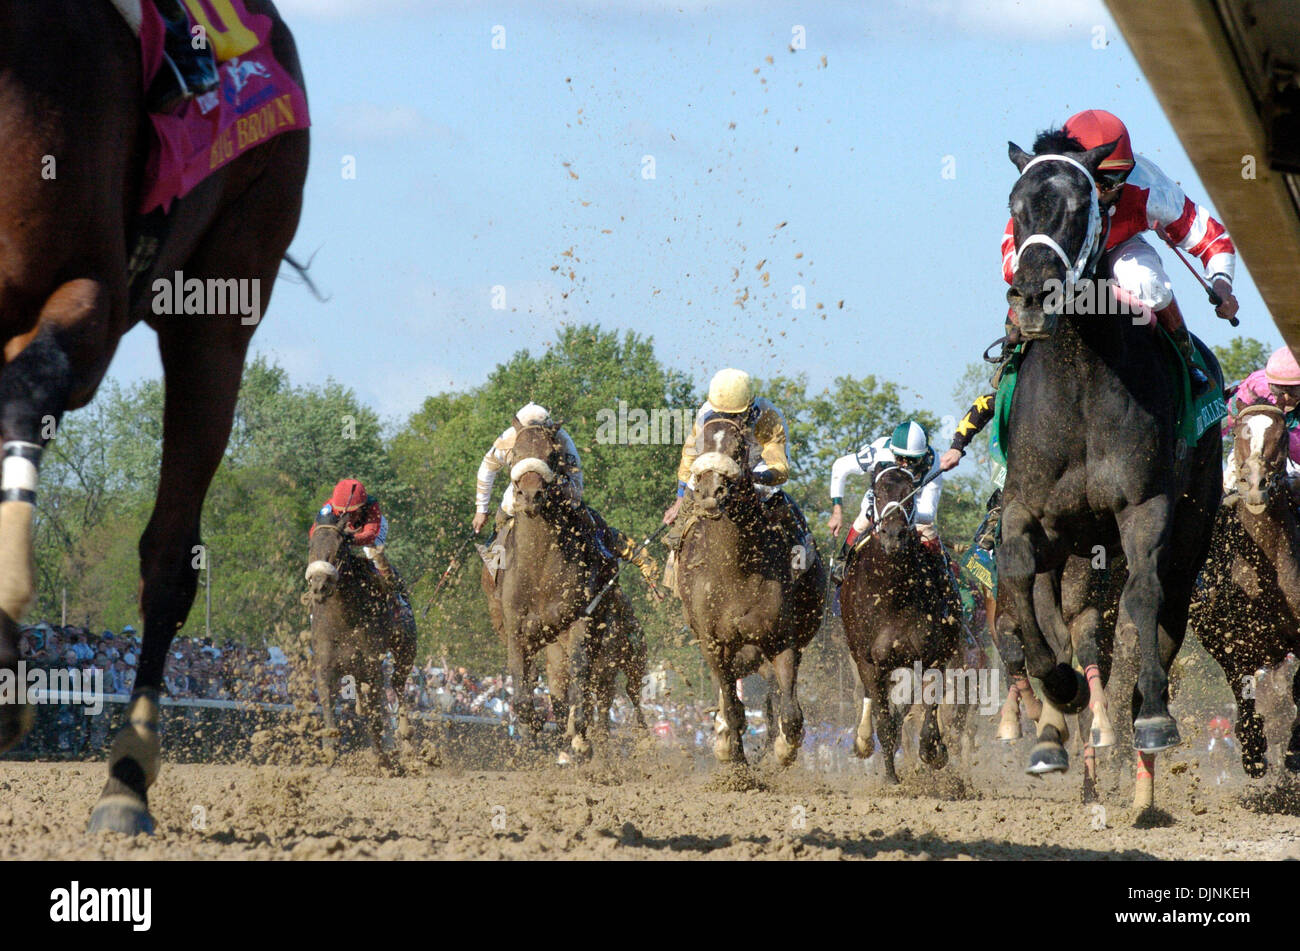 May 03, 2008 - Lexington, Kentucky, USA - Big Brown and Kent Desormeaux, left, take the lead in the mid stretch as Eight Belles and Gabriel Saez, right, move into second in the 134th running of the Kentucky Derby at Churchill Downs. (Credit Image: © Ron Garrison/Lexington Herald Leader/ZUMA Press) RESTRICTIONS: * U.S. Tabloid Rights OUT * Stock Photo